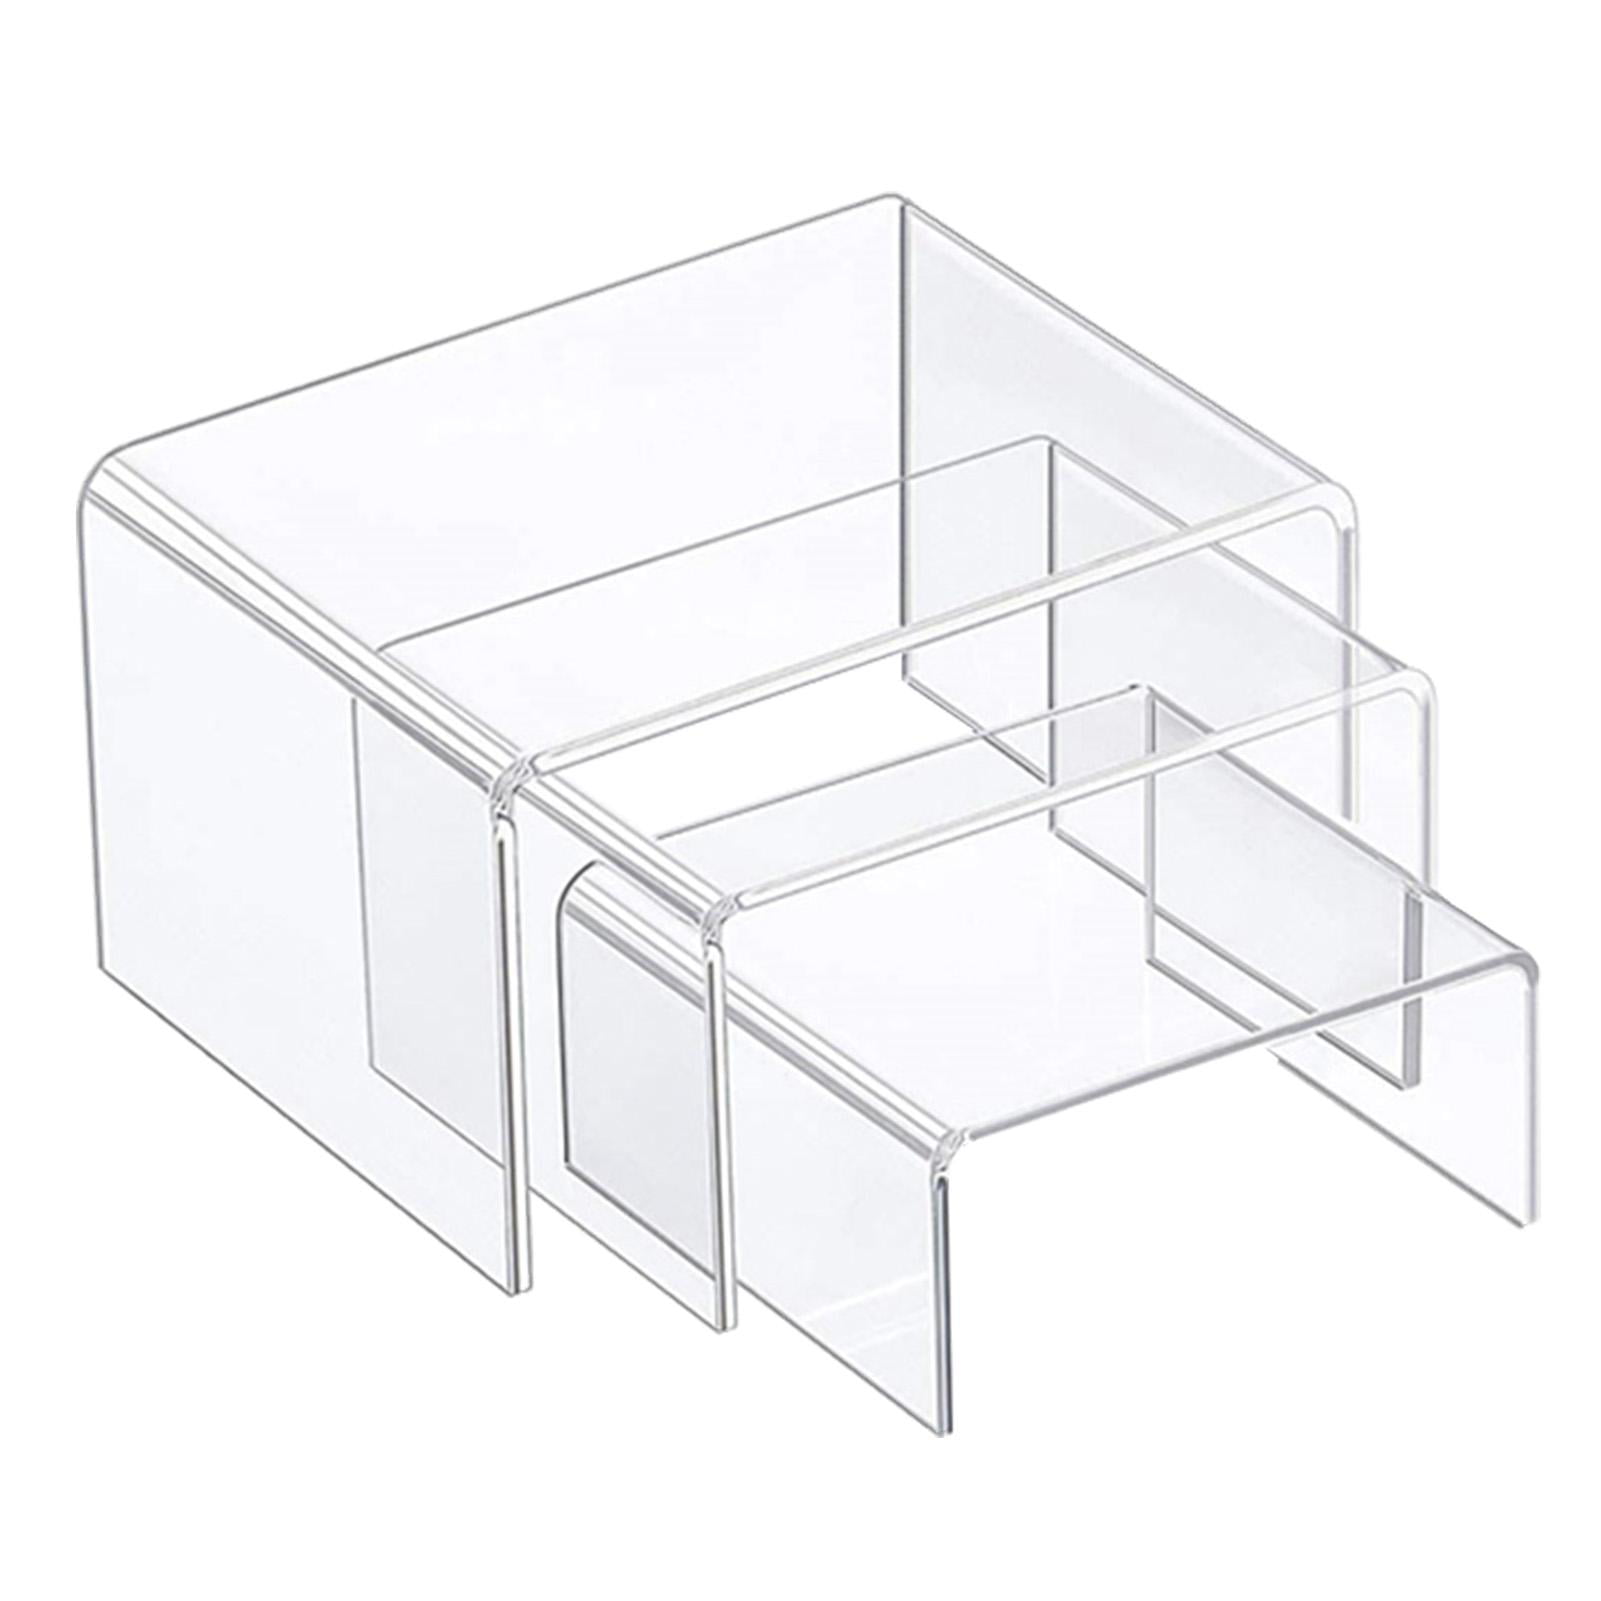 3 H x 12 W x 8 D Plymor Clear Acrylic Display Riser with Tray Handles 3/16 Thick